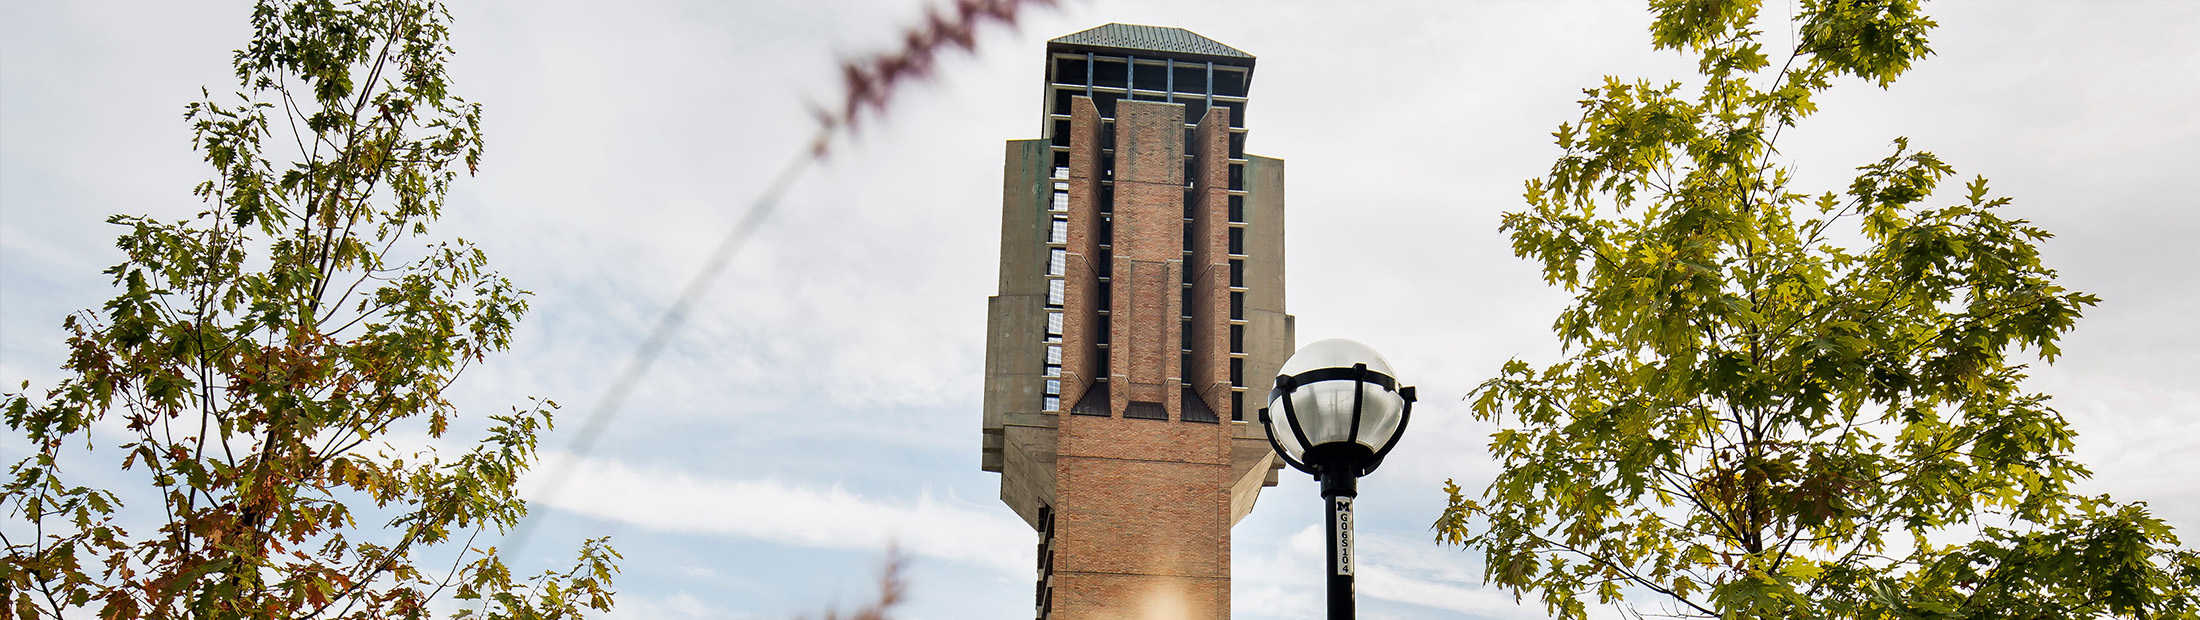 Featured image of North Campus belltower